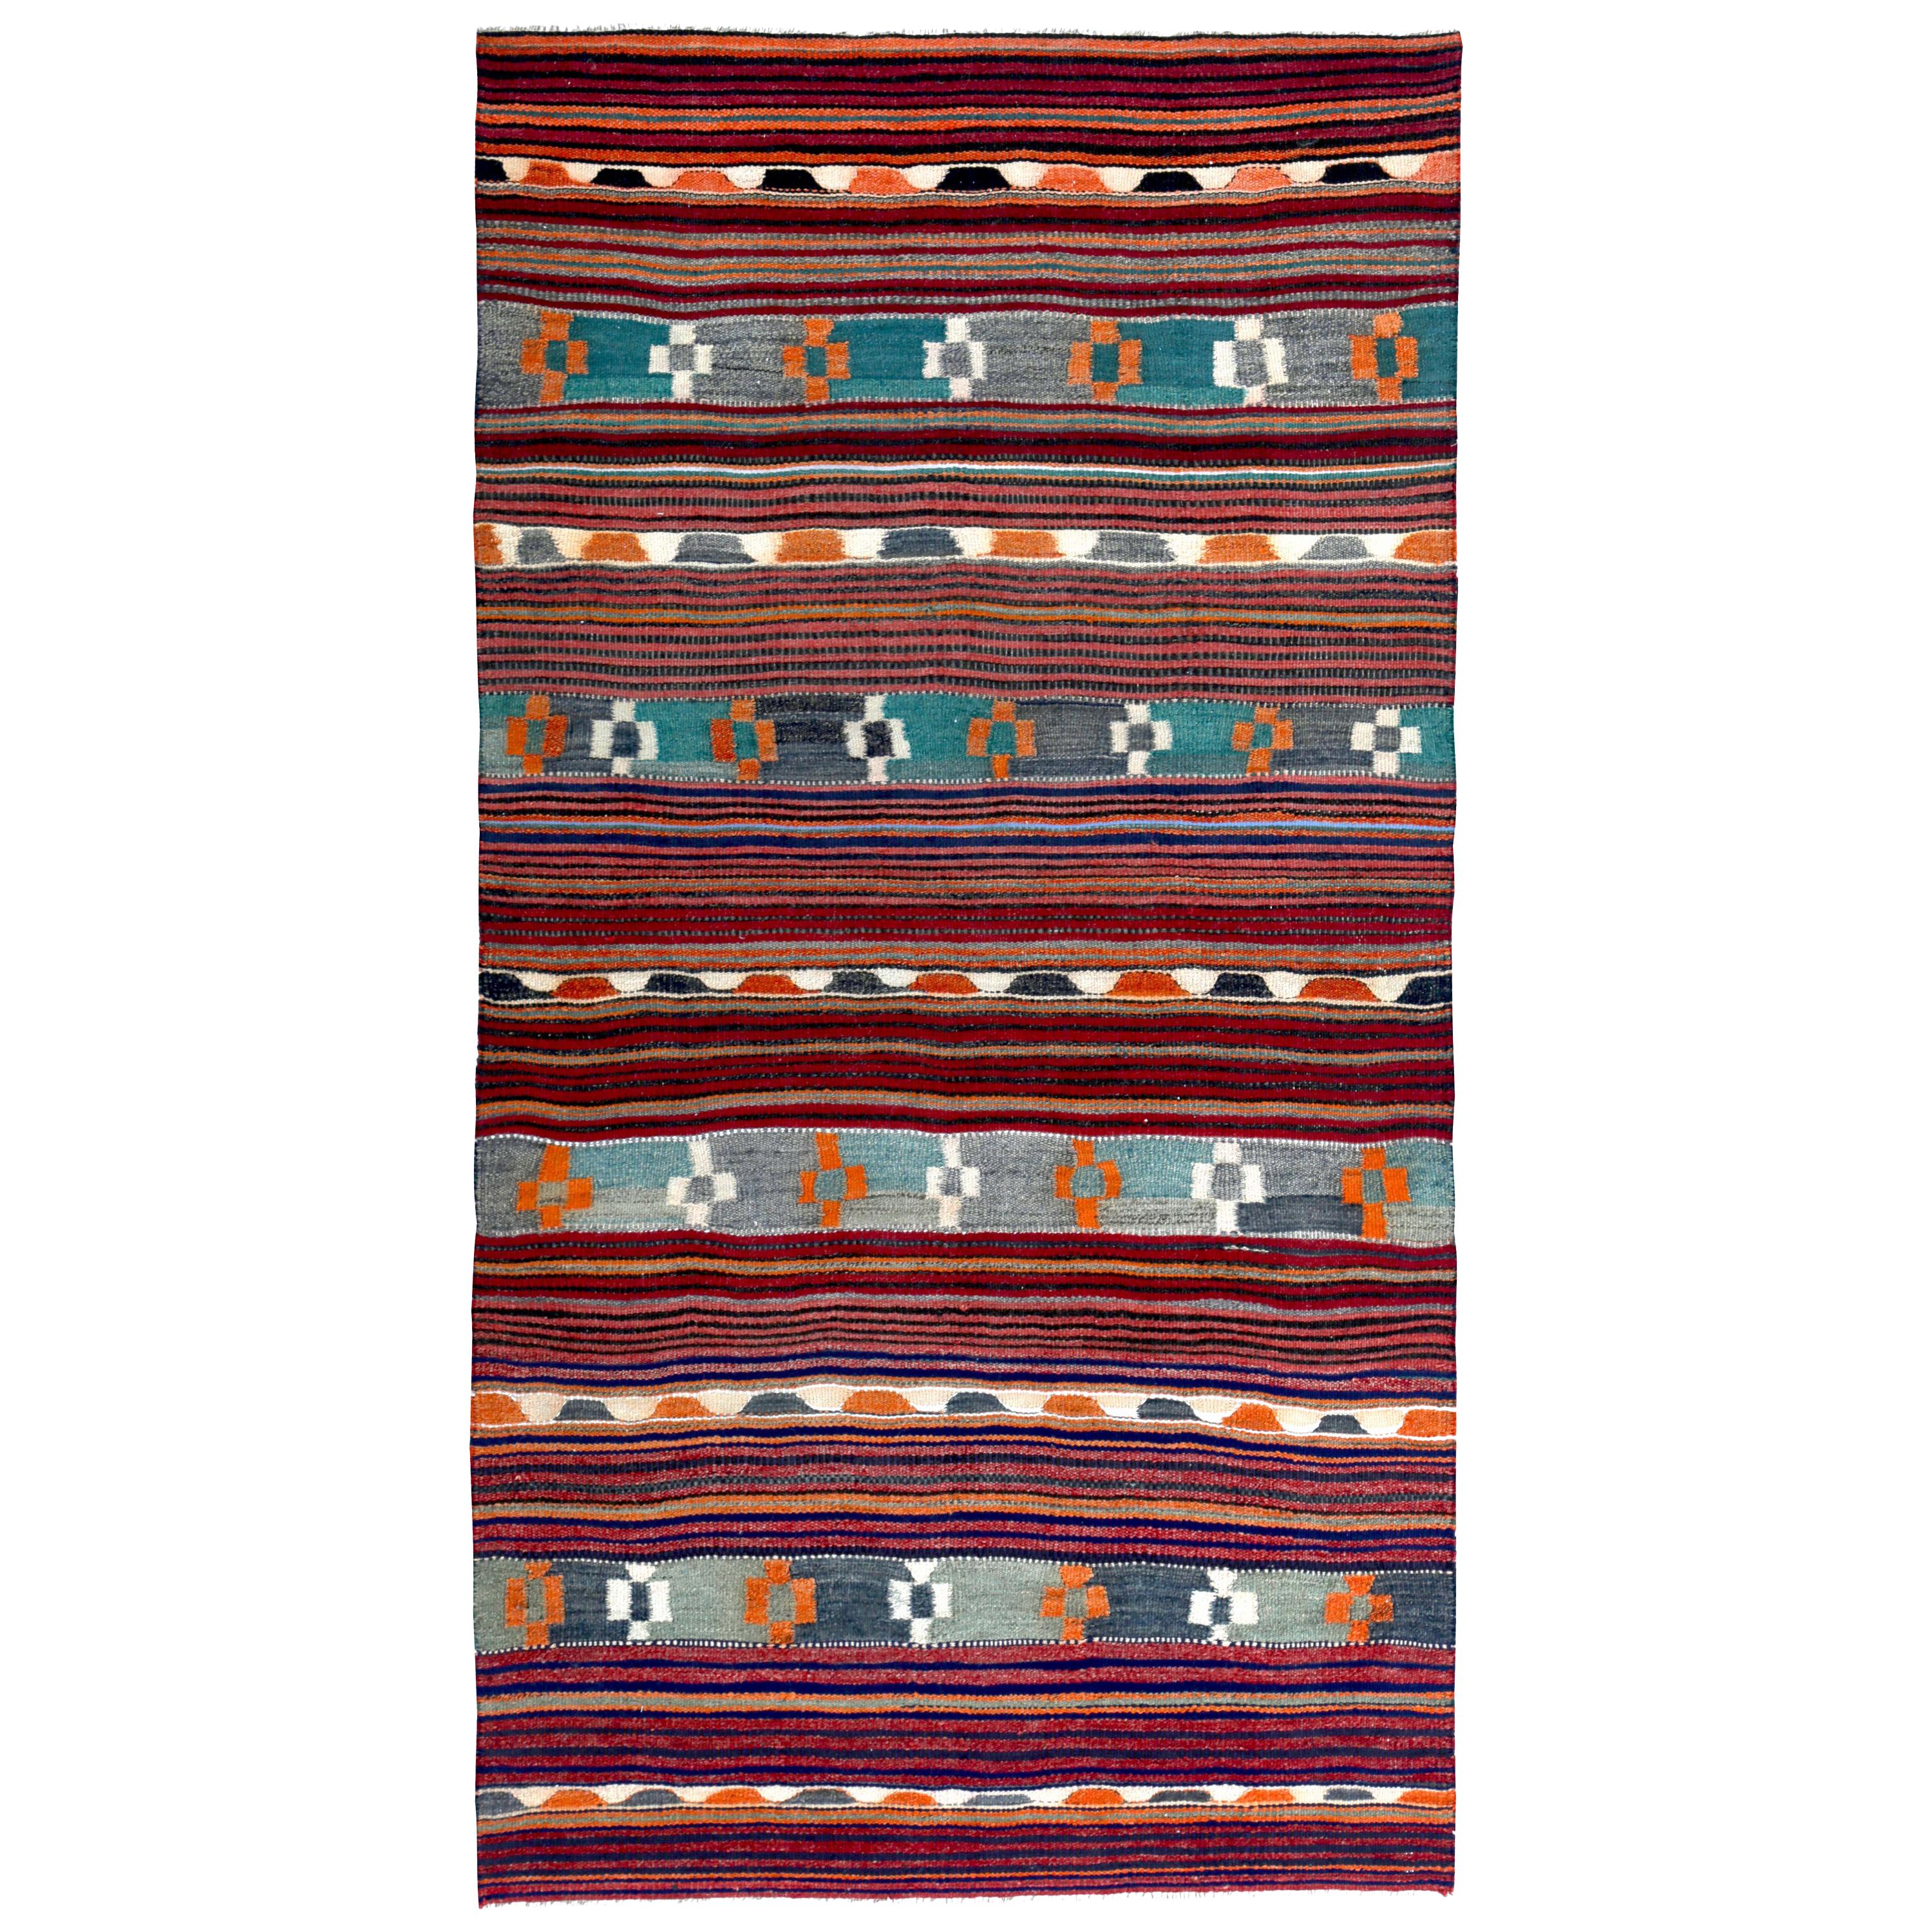 Modern Turkish Kilim Rug with Blue, Green & Orange Tribal Design in a Red Field For Sale